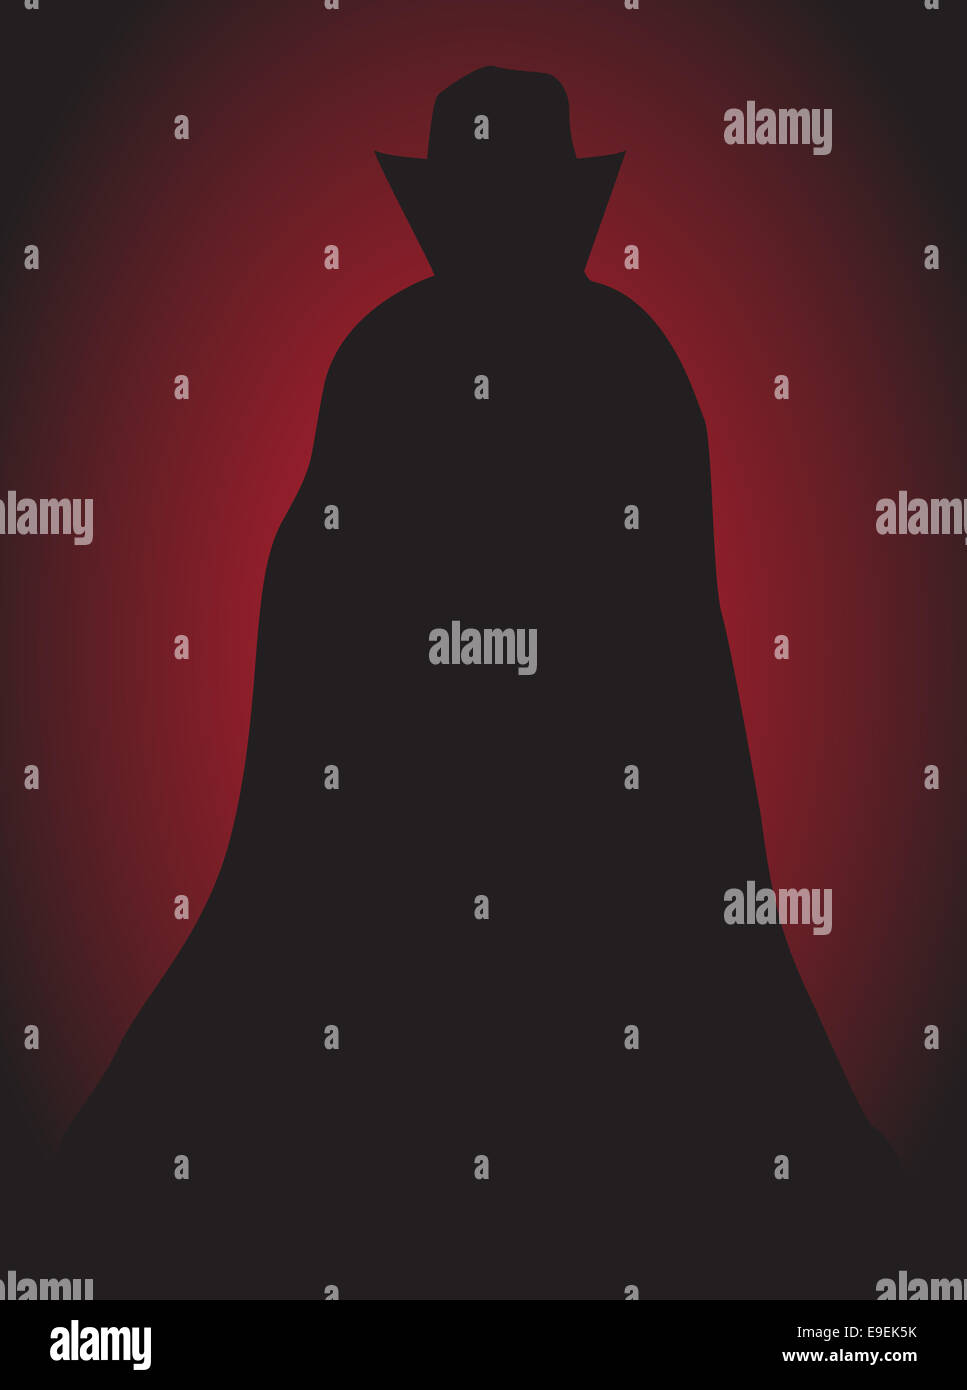 A Dracula Silhouette on a red and black background Stock Photo